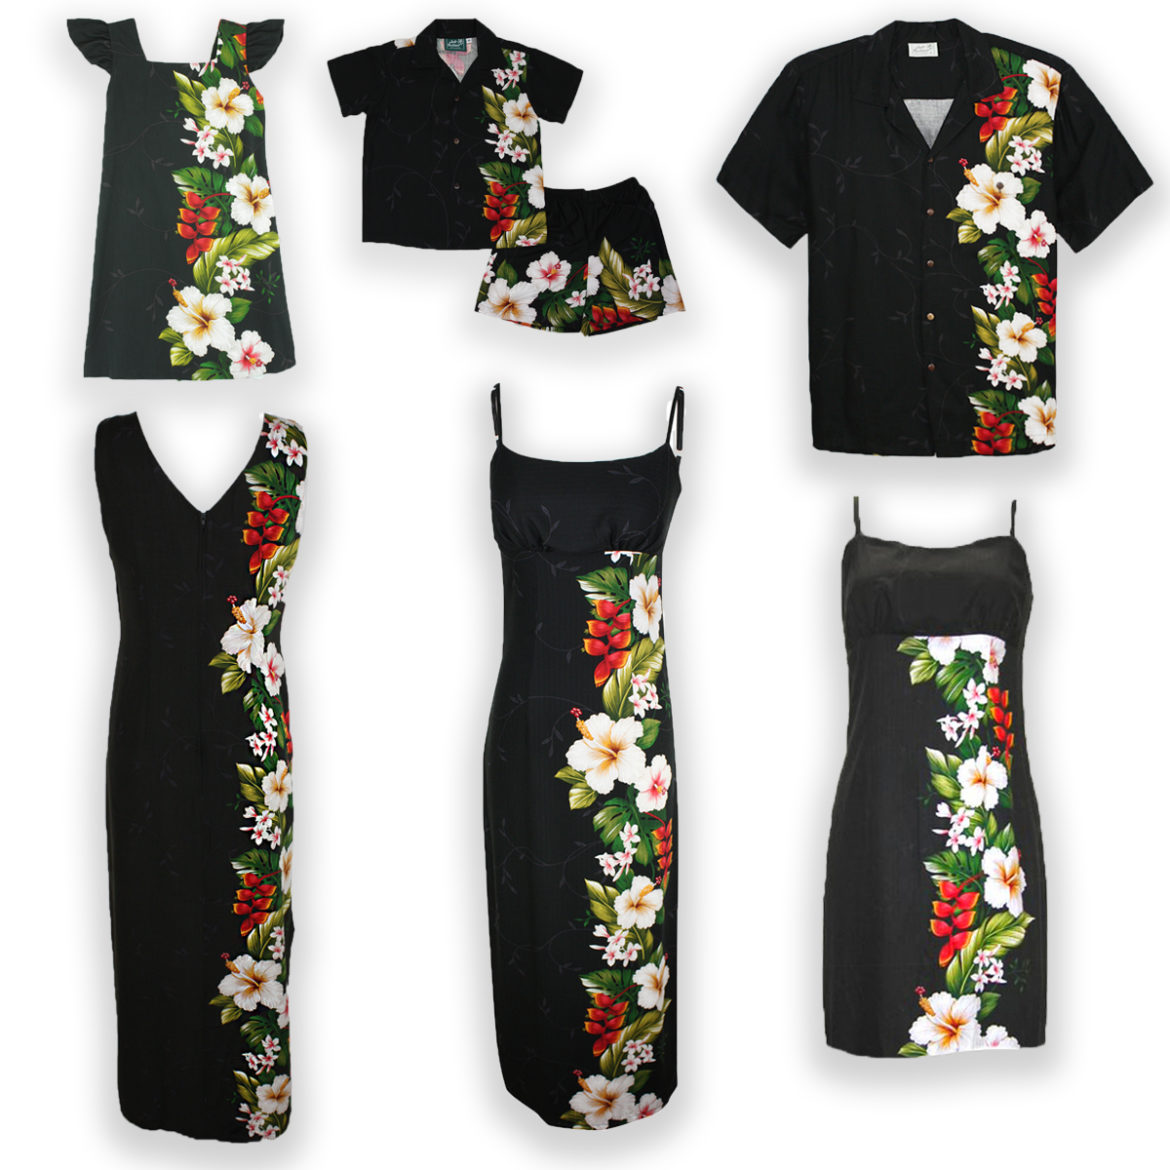 Paradise Garden Black - Family Matching Outfits